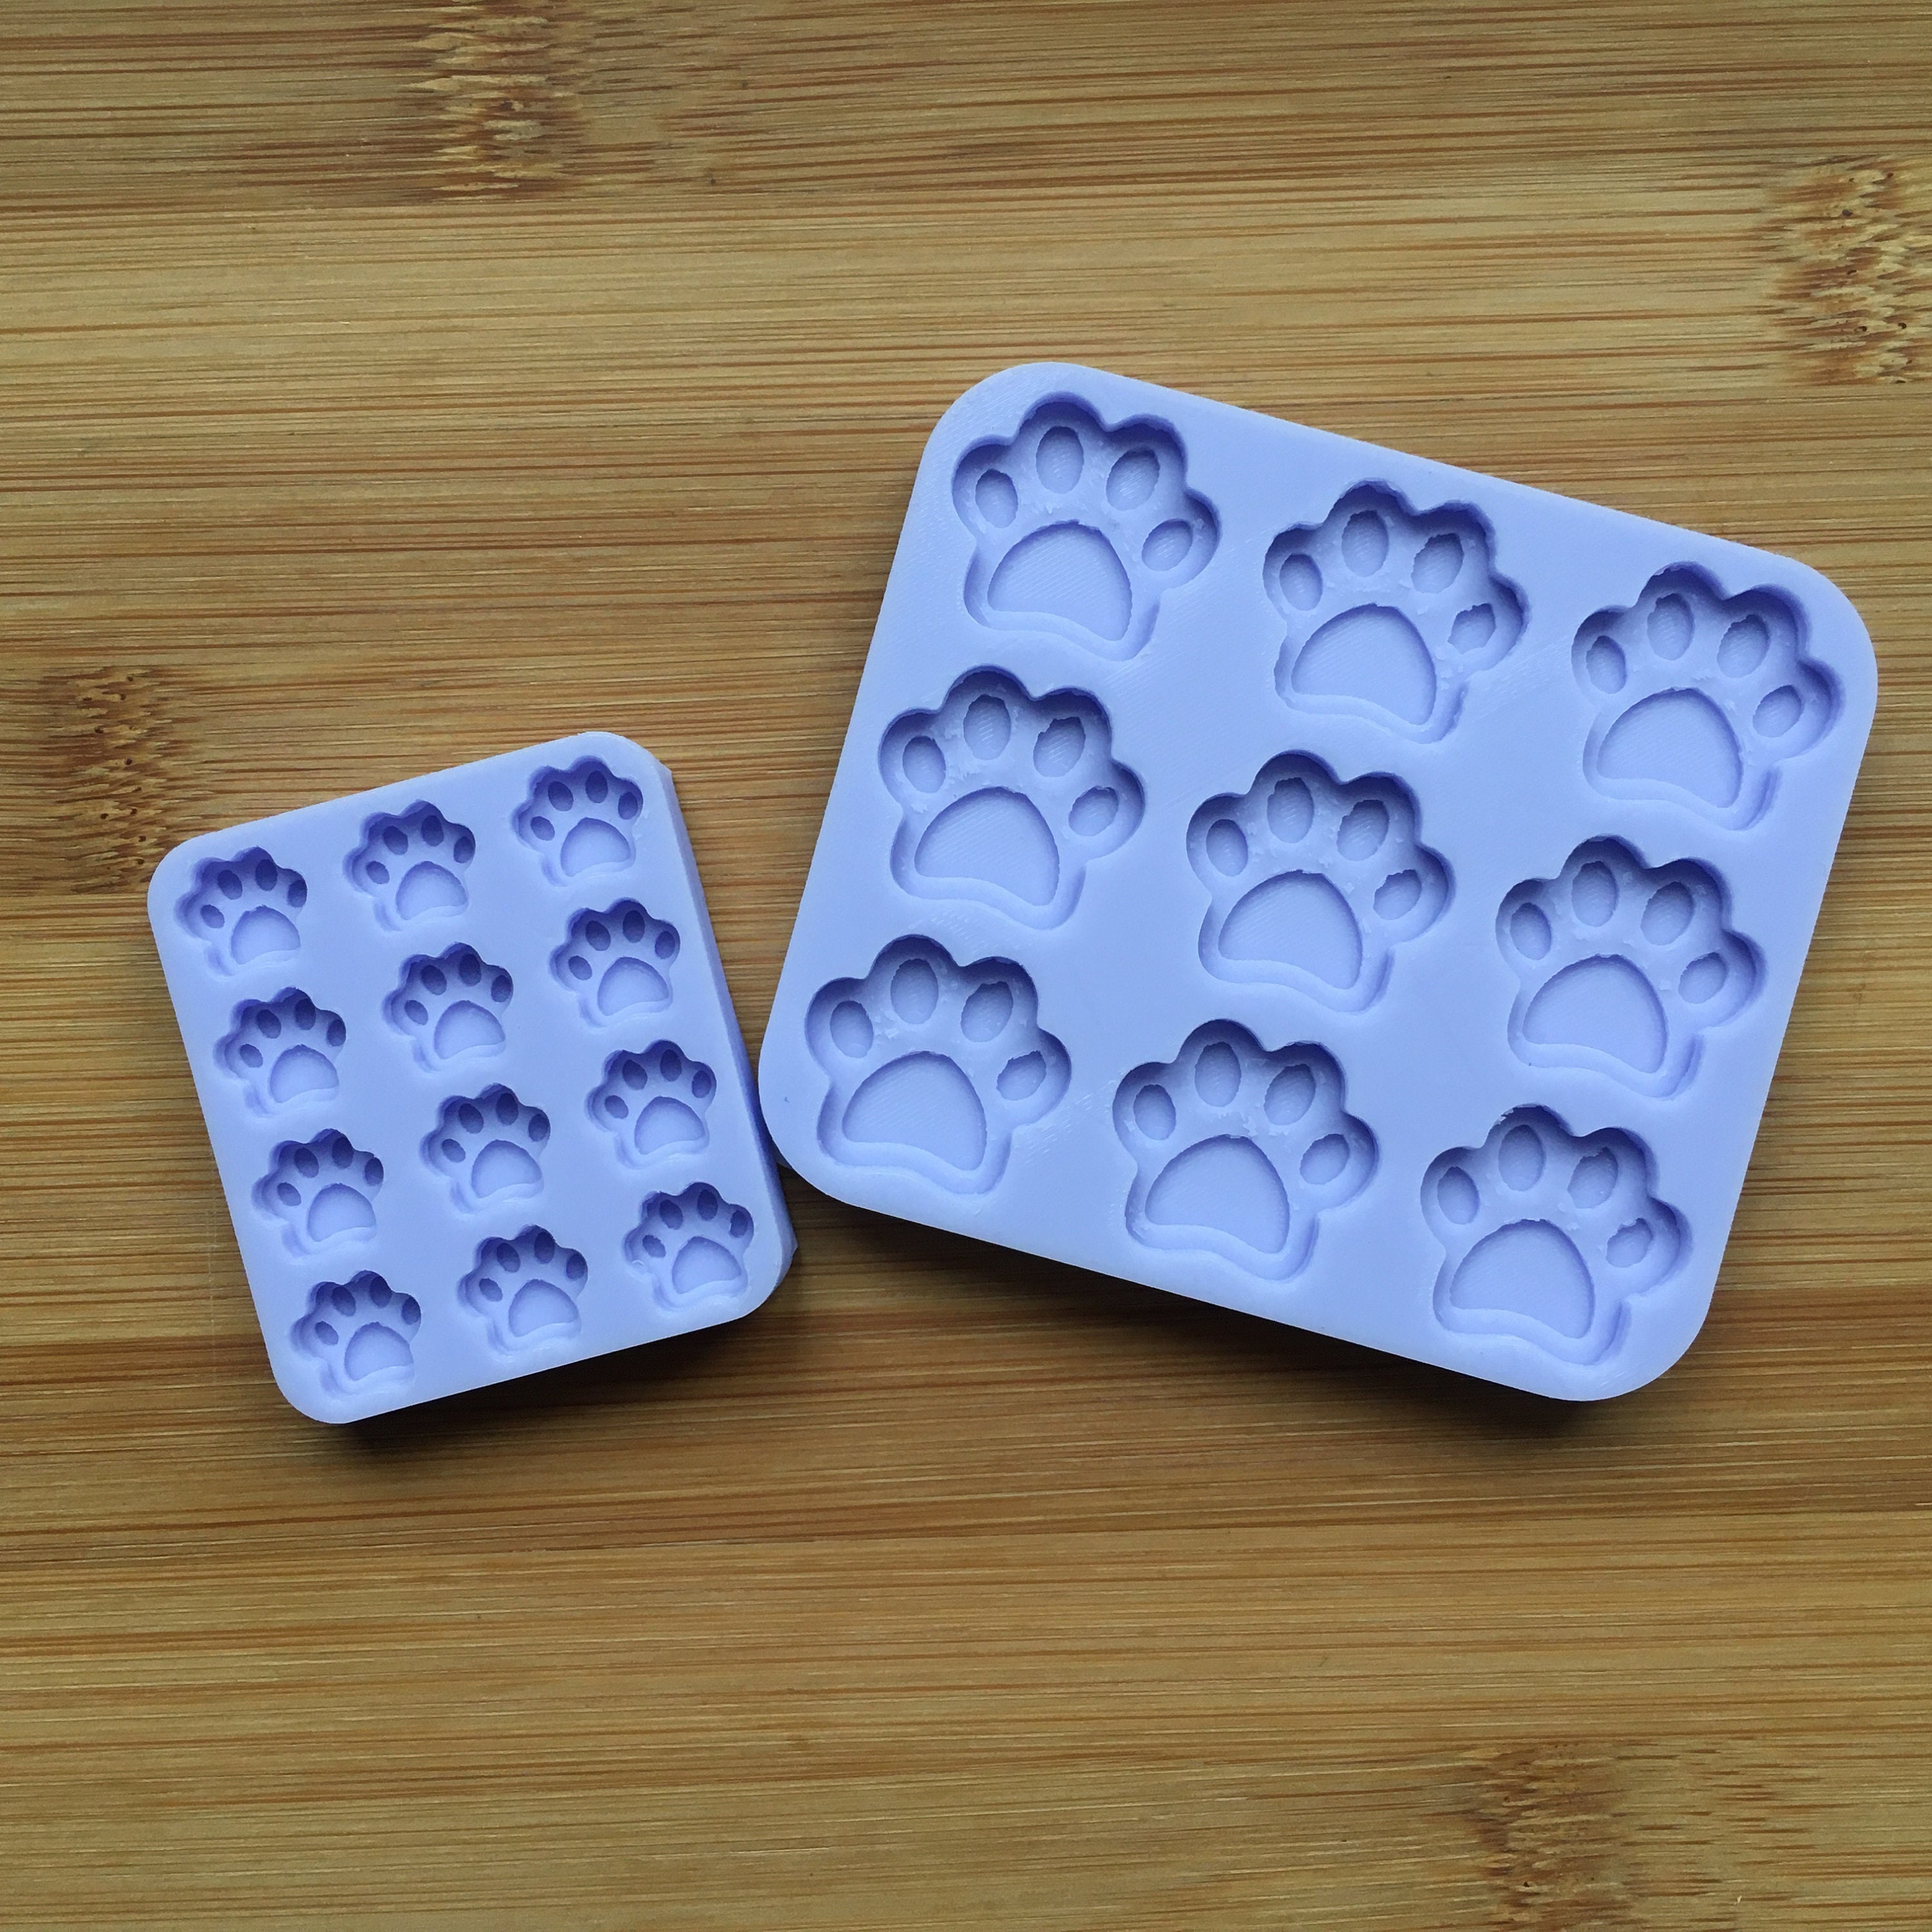 DOG BISCUIT MOLD, Silicone Molds, Dog Biscuits, Molds, Silicone Moulds, Dogs,  Dog Cookies Dog Stuff Dog Food Pet Molds Cookies Mold Dog Food 